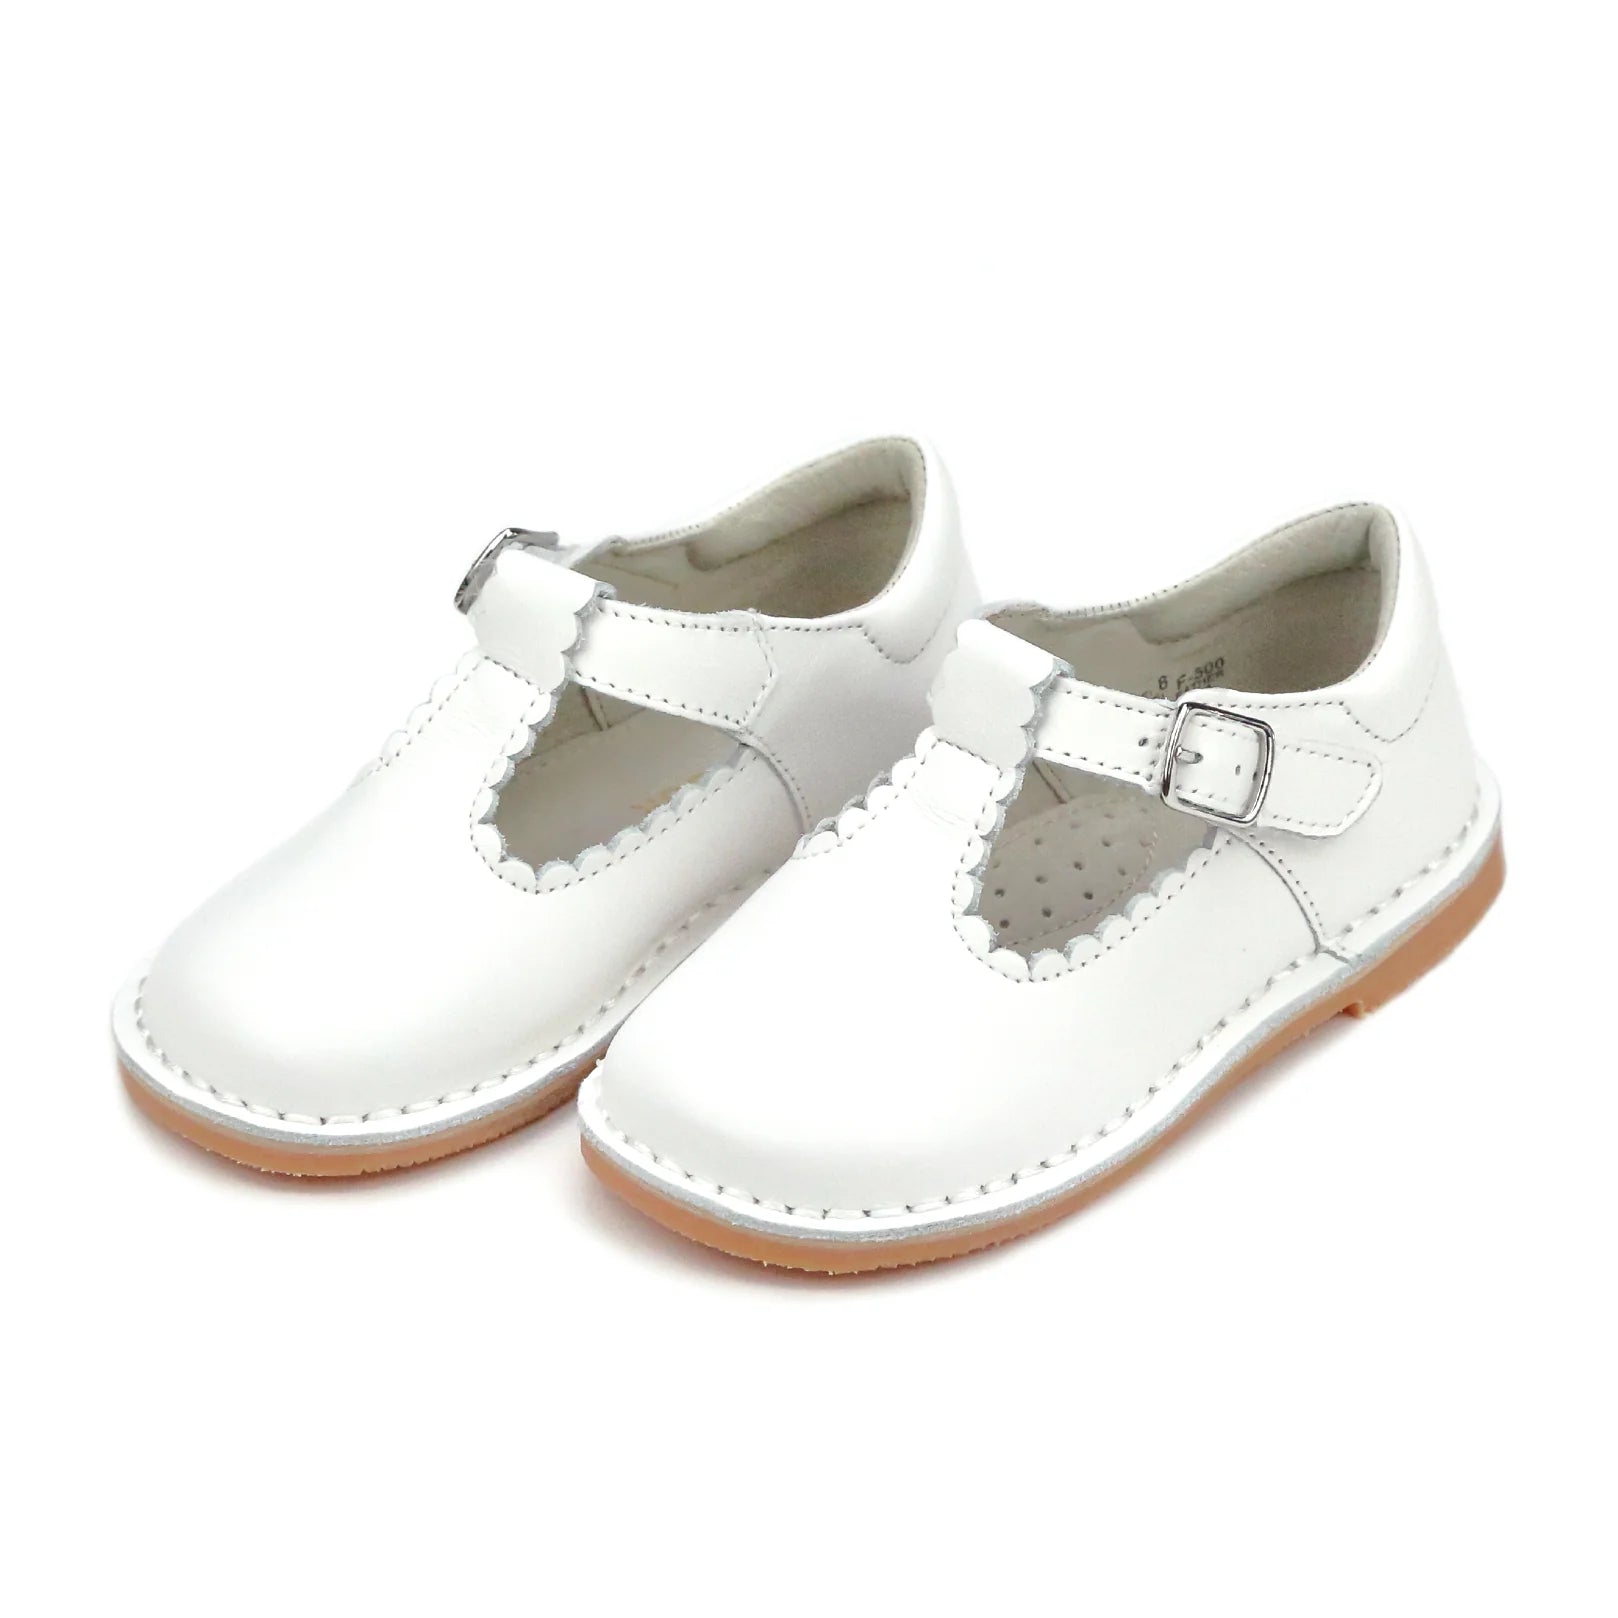 L'AMOUR Selina Scalloped T-Strap Mary Jane - White